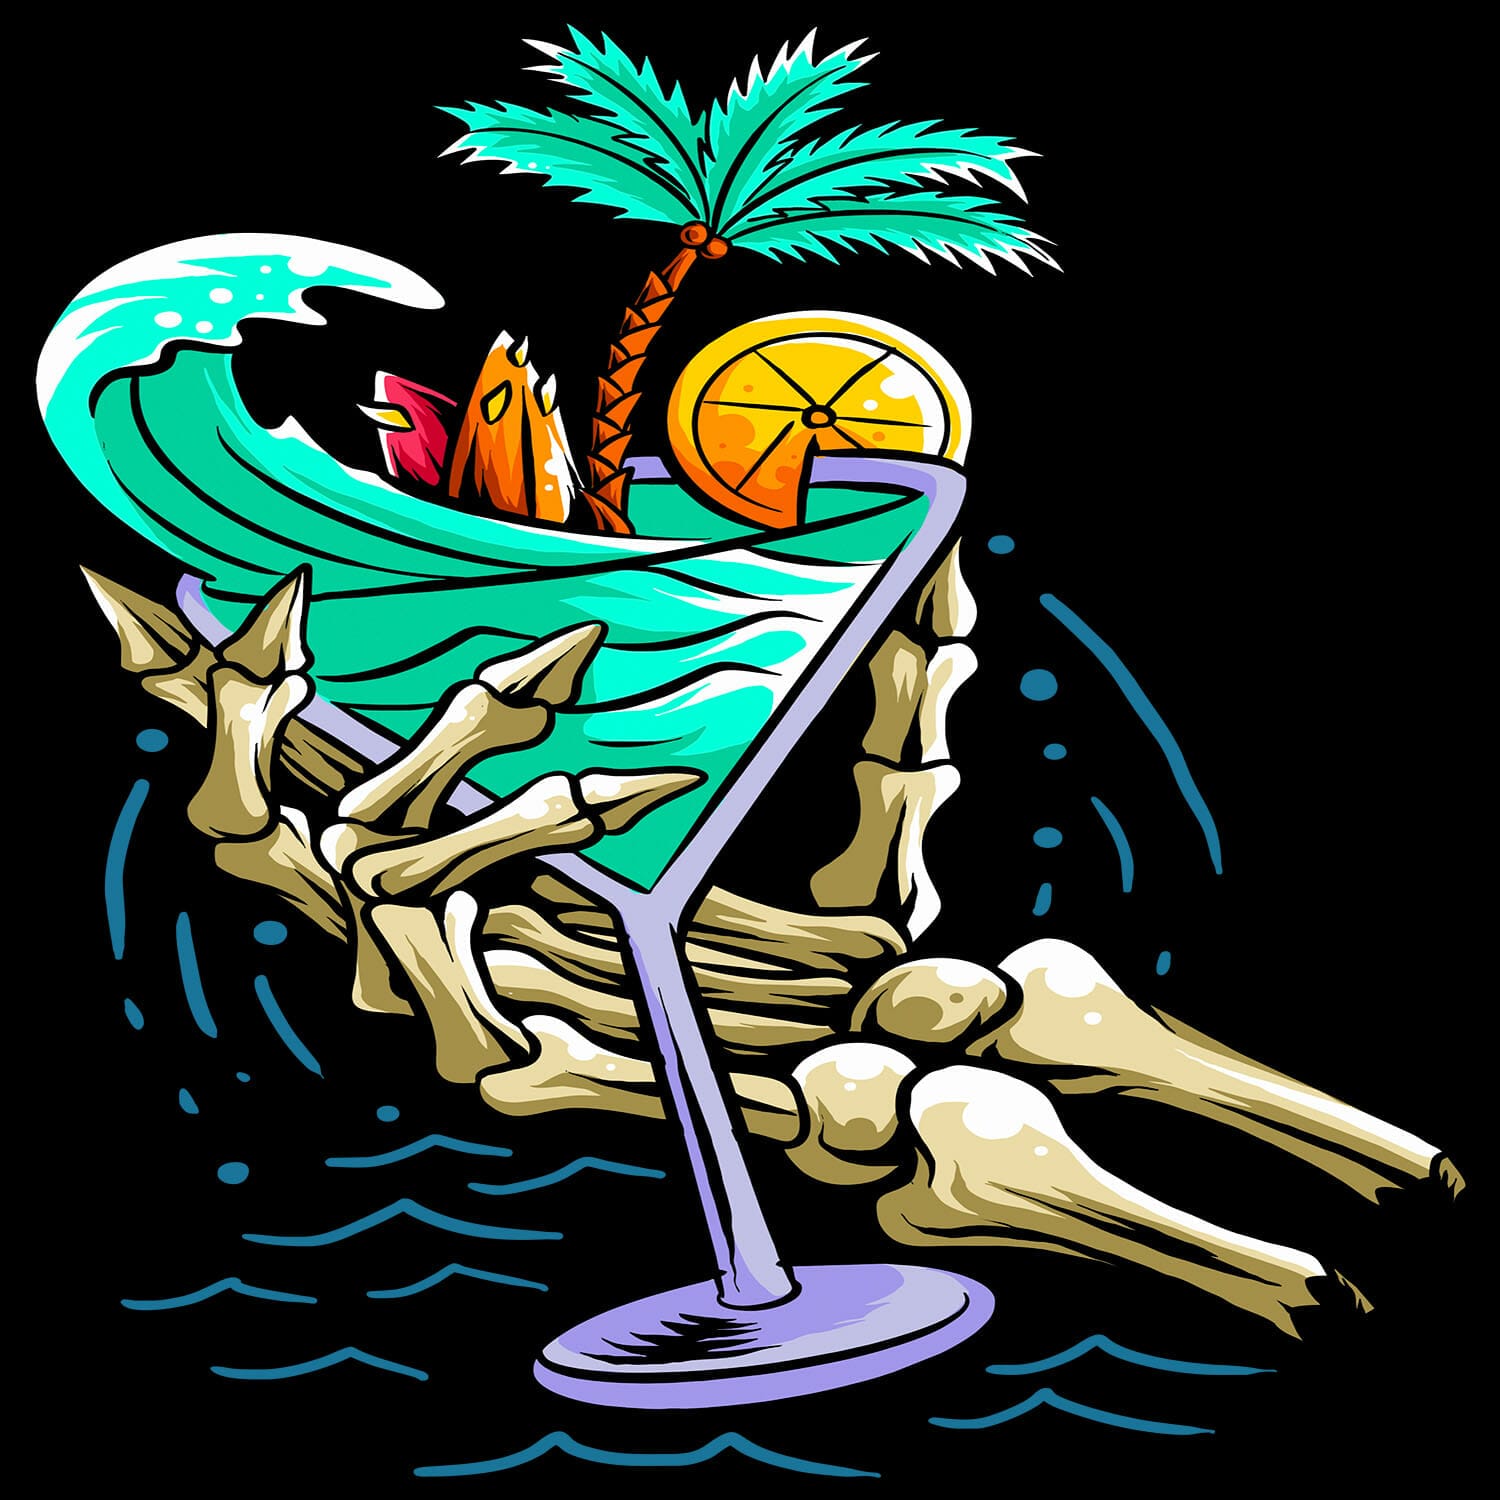 Skeleton Hand With Cocktail Glass TShirt Design.